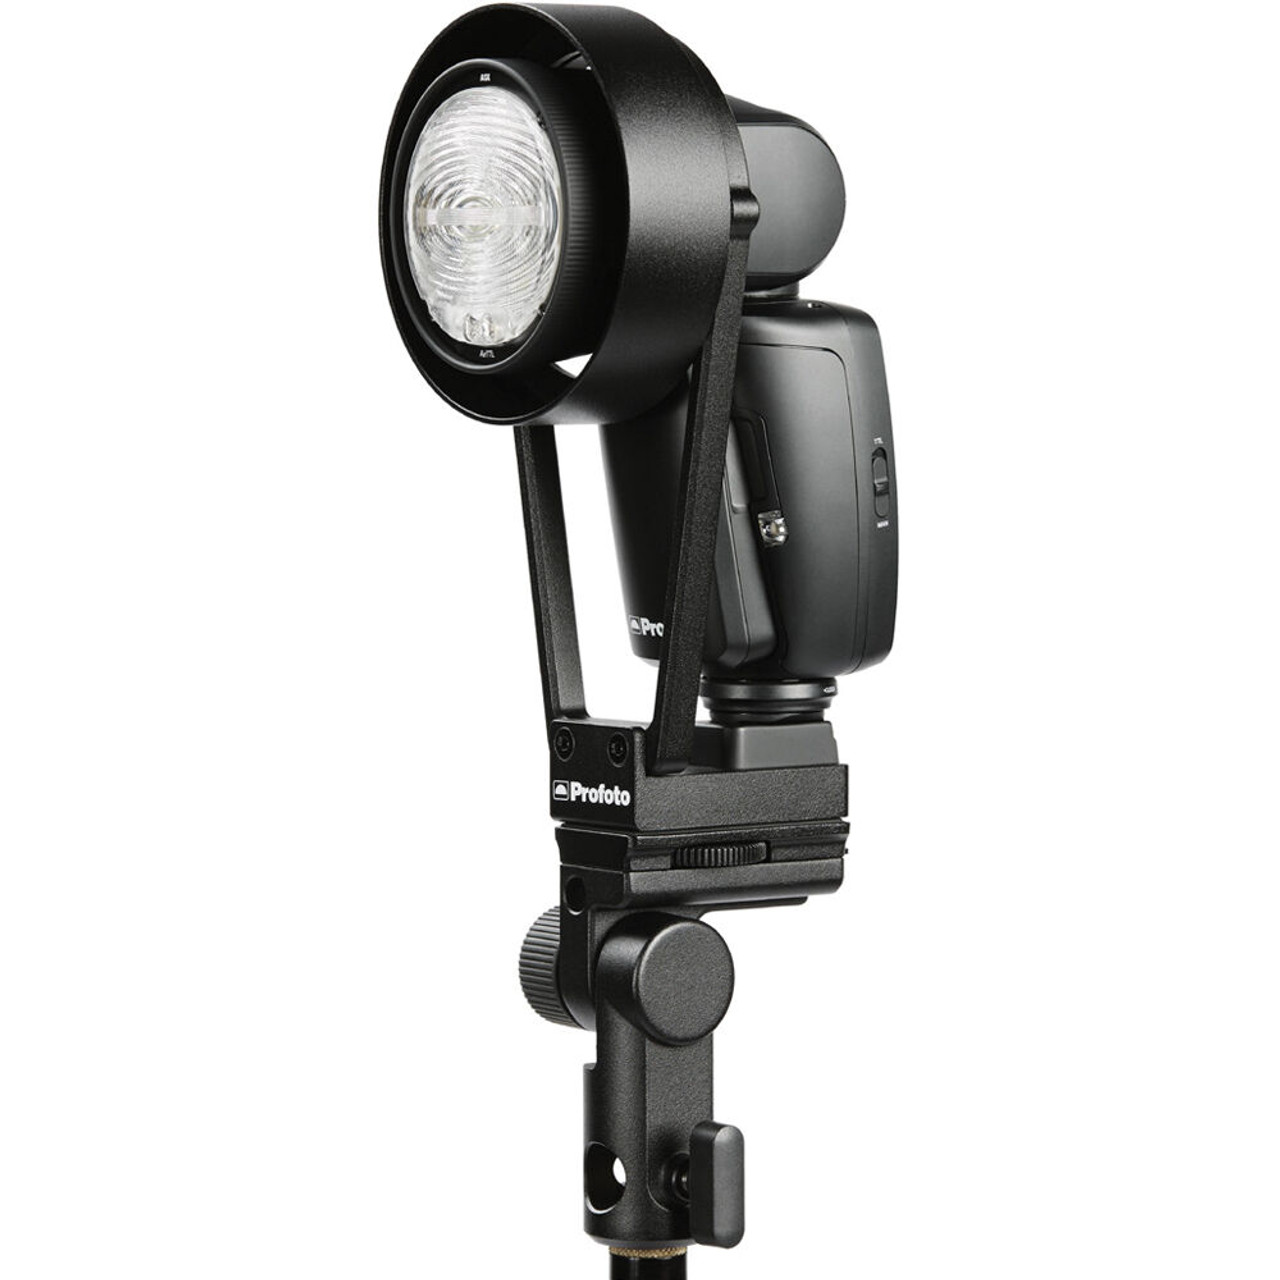 Profoto OCF Adapter For on camera A series speedlights To Use all